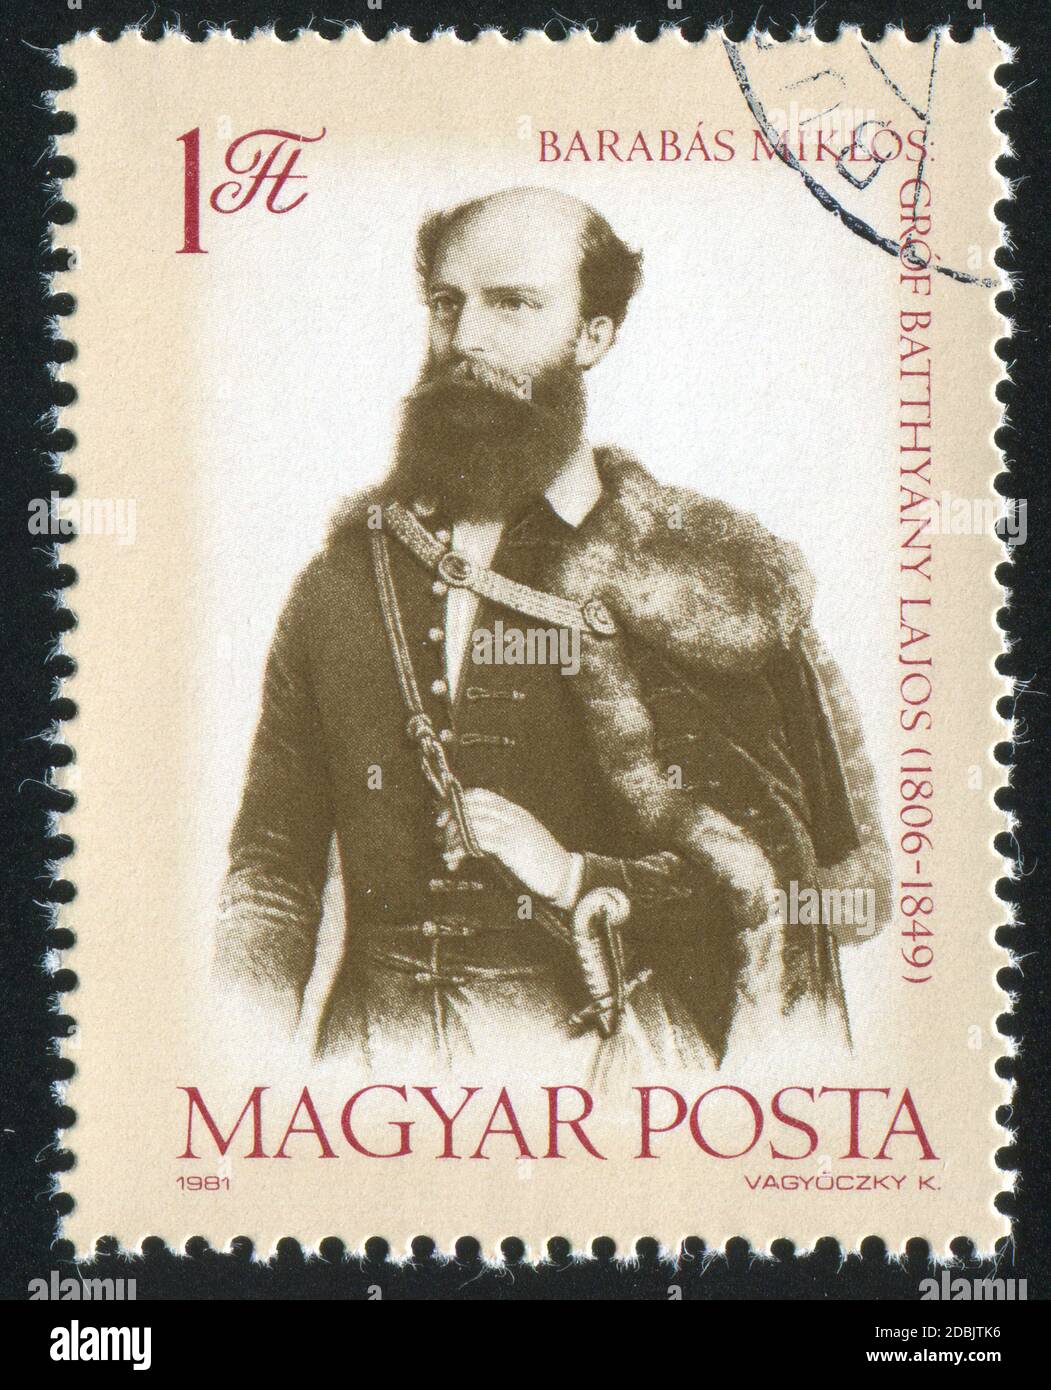 HUNGARY - CIRCA 1981: stamp printed by Hungary, shows Count Lajos Batthyany, primeminister circa 1981 Stock Photo